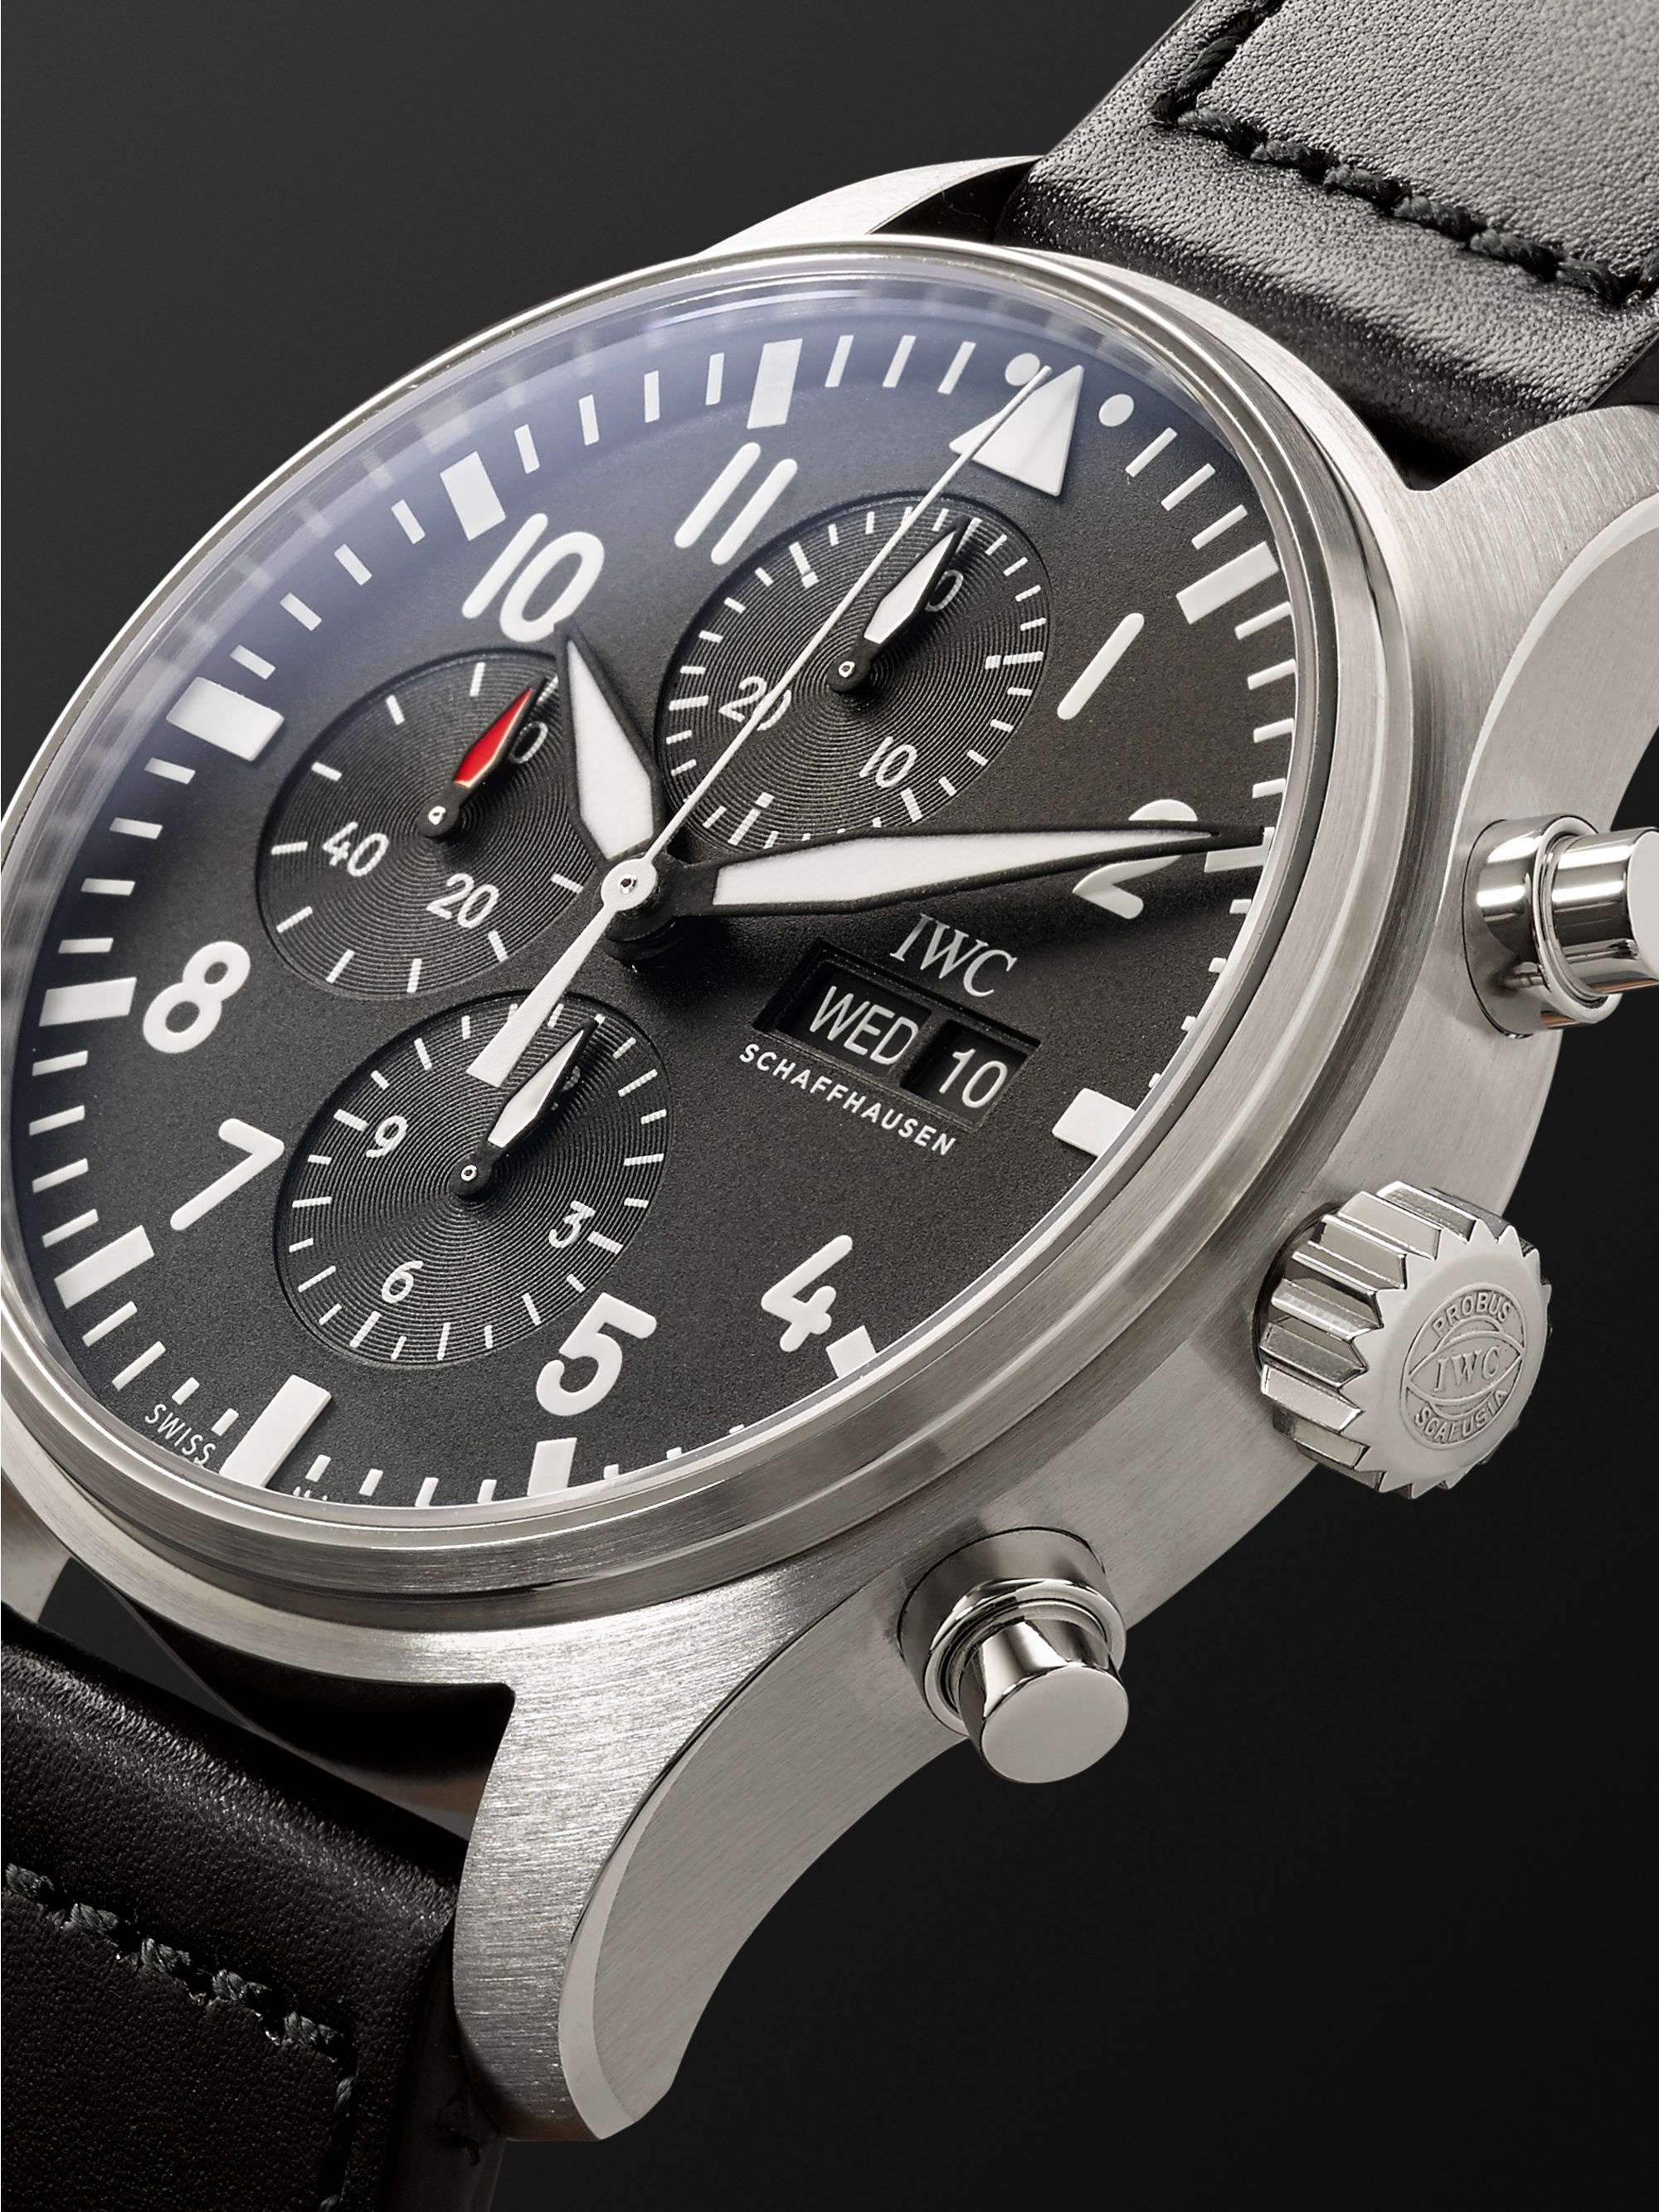 IWC SCHAFFHAUSEN Pilot's Automatic Chronograph 43mm Stainless Steel and Leather Watch, Ref. No. IW377709